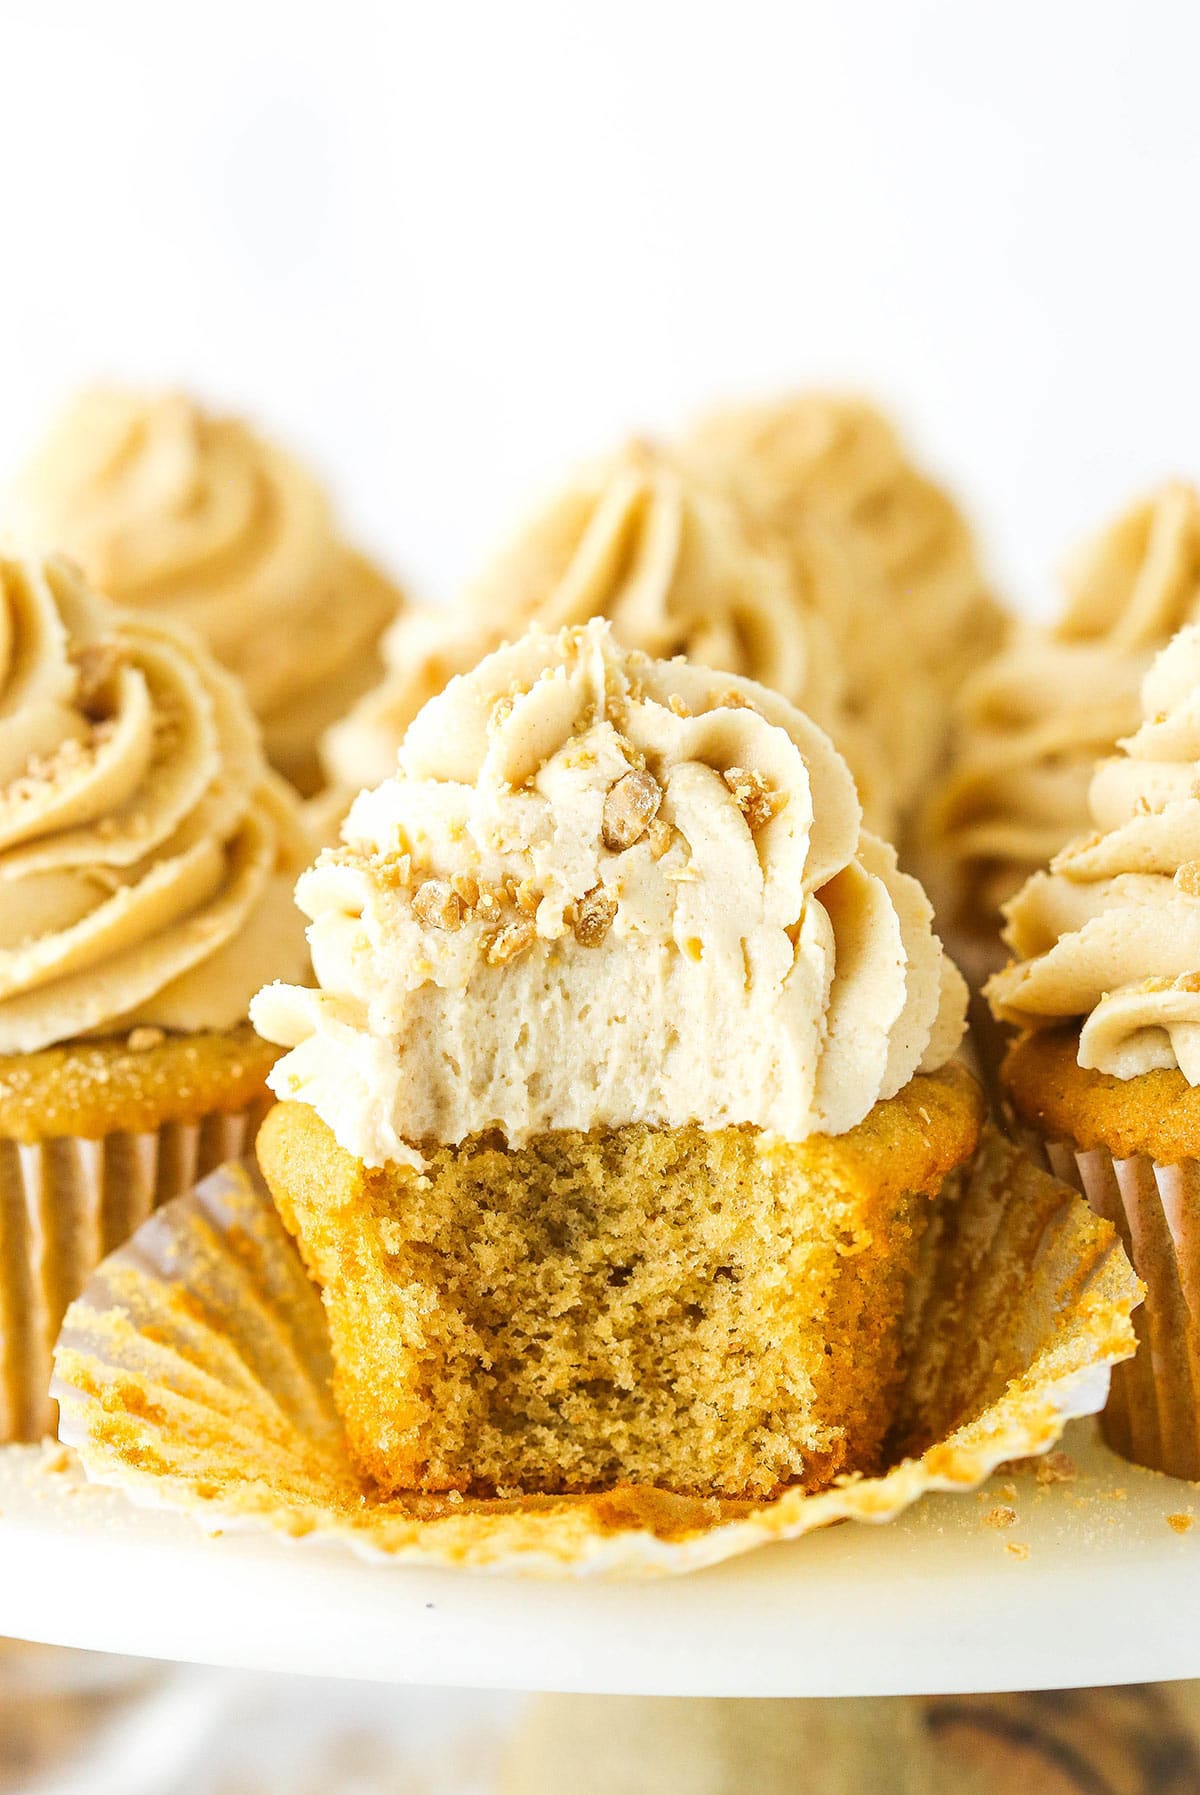 An unwrapped peanut butter cupcake with a bite taken out to reveal the fluffy interior